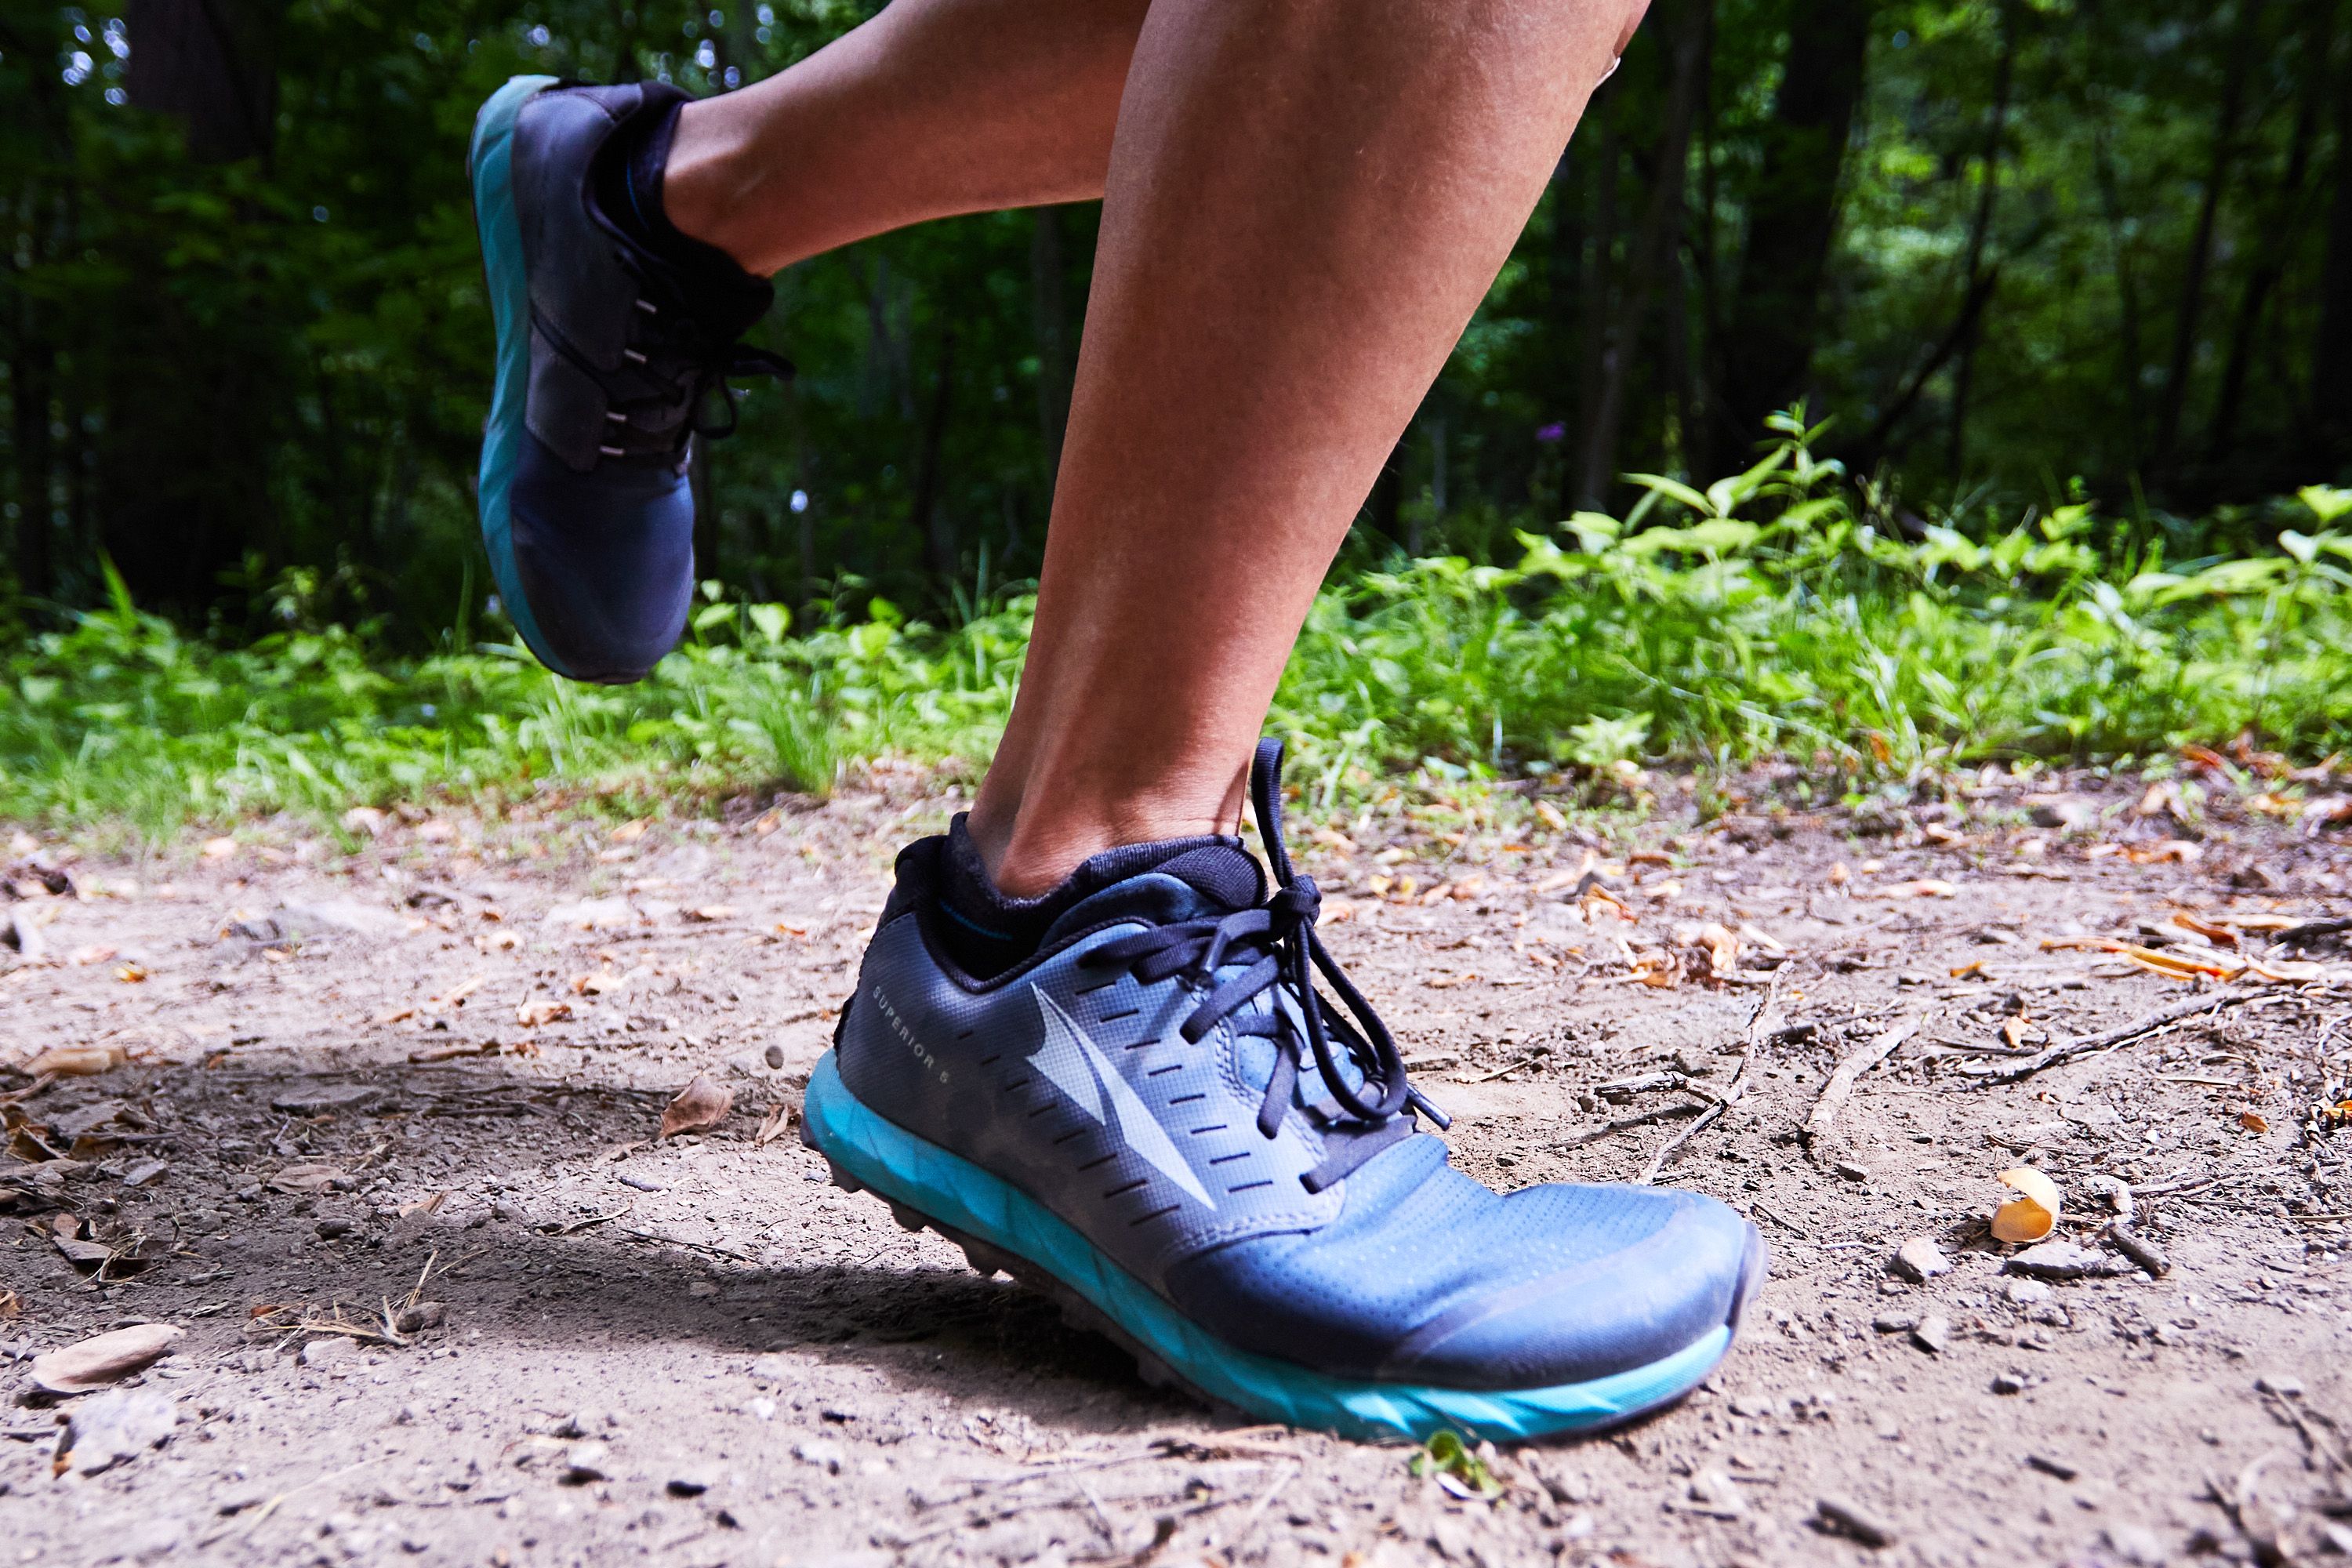 new balance trail runners for hiking